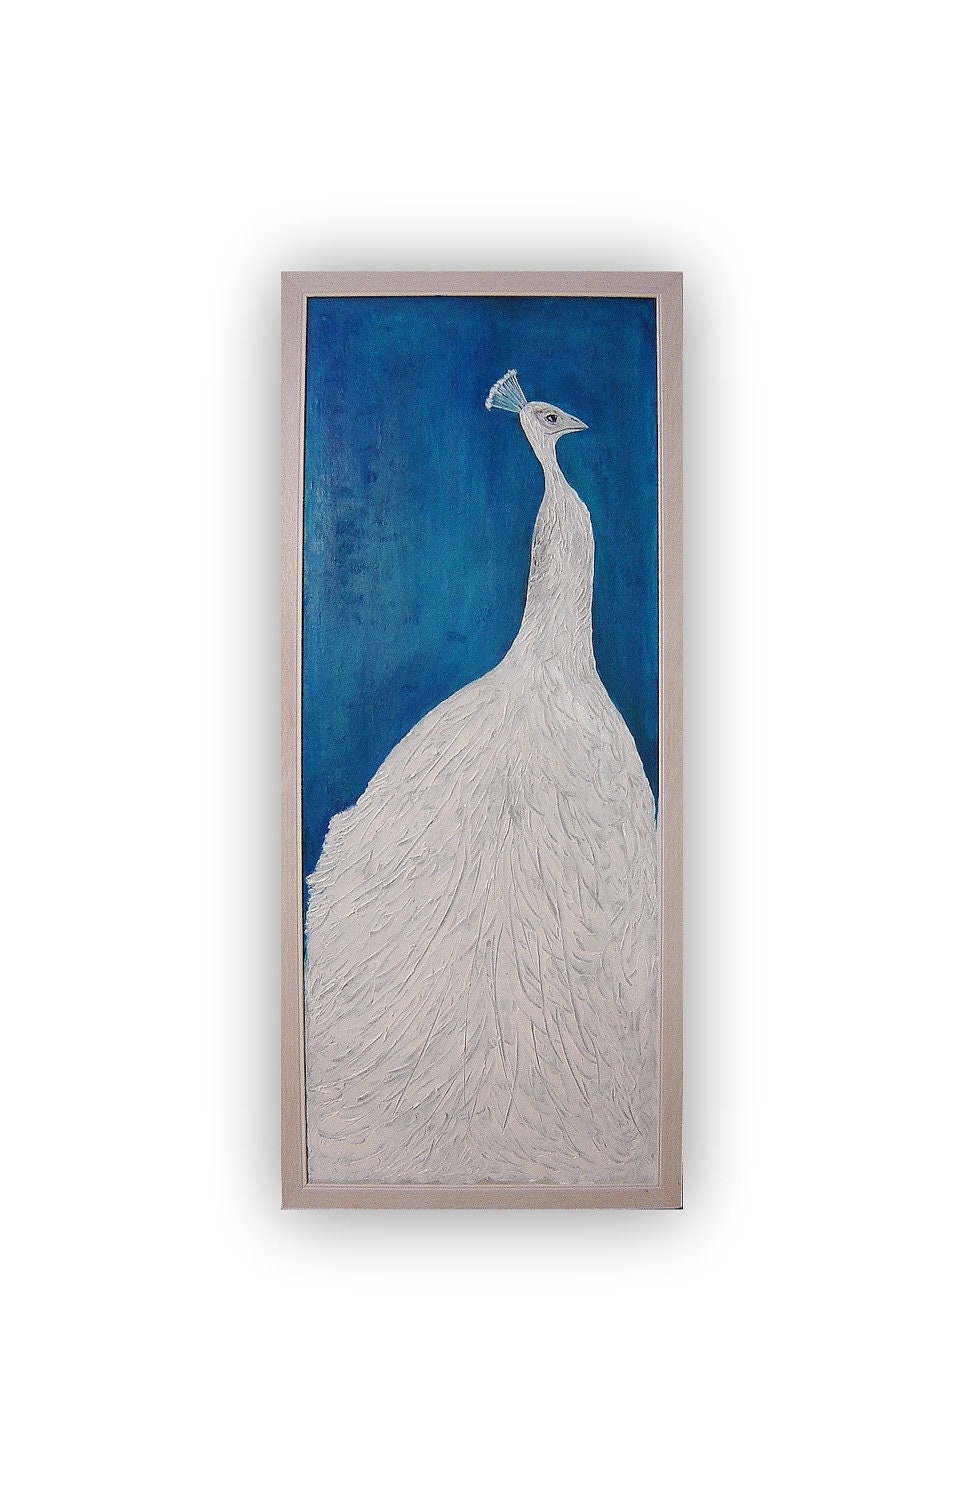 White peacock. Original acrylic painting. Canvas. Framed. Textured painting. Modern Contemporary Art. - almondtreeart